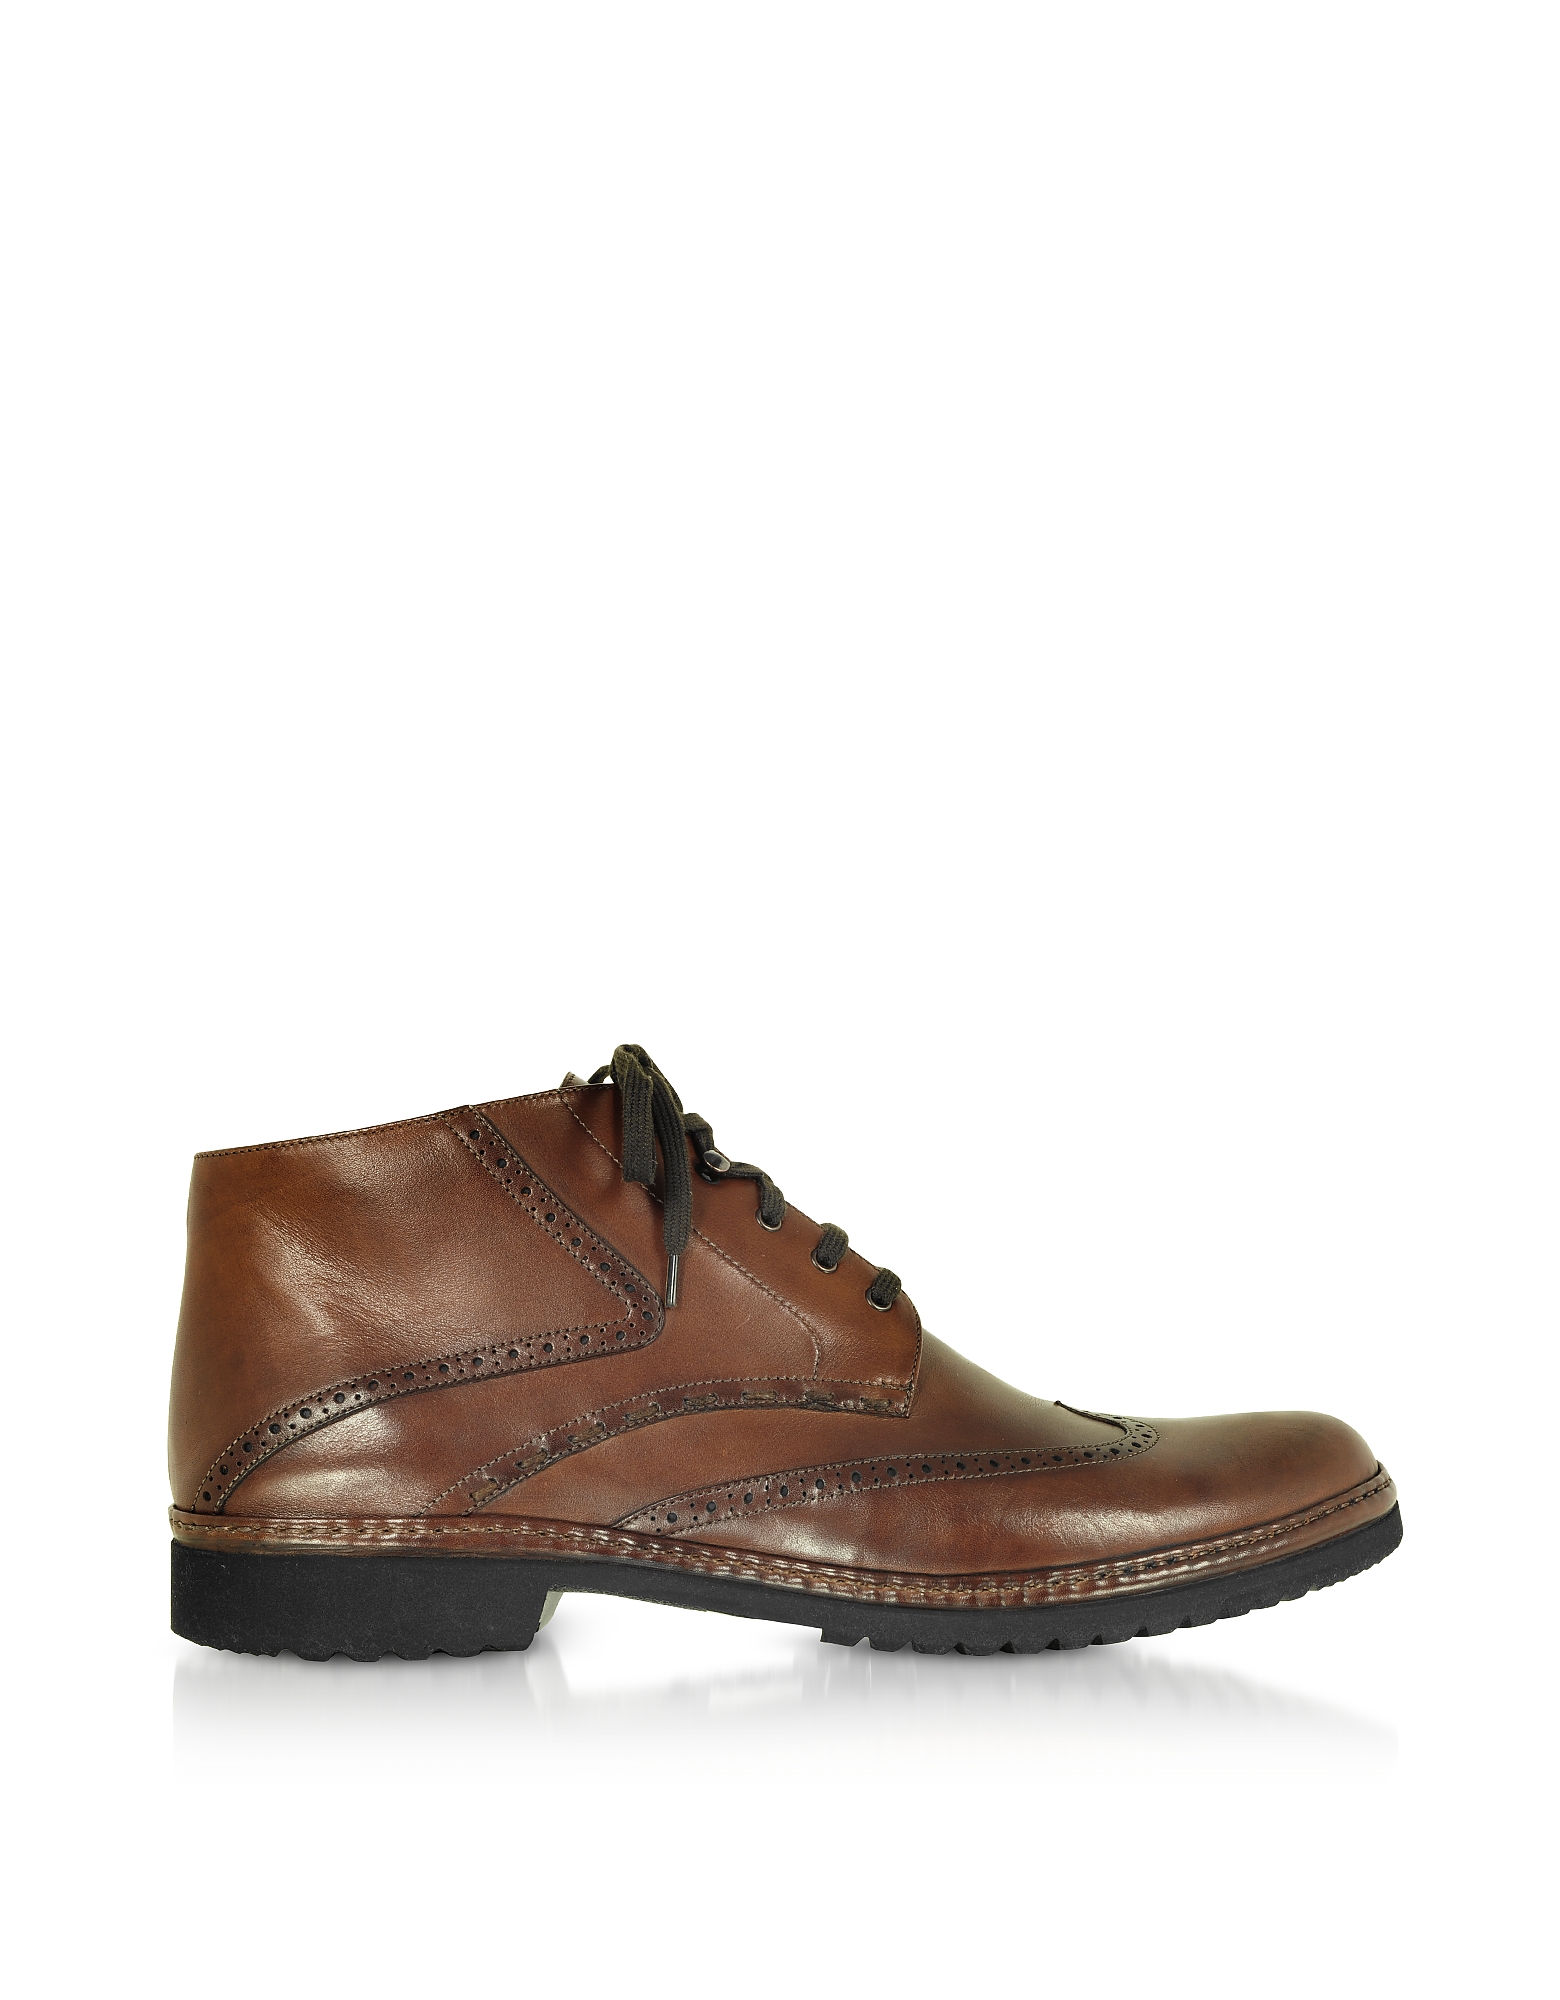 Pakerson Tan Handmade Italian Leather Wingtip Ankle Boots